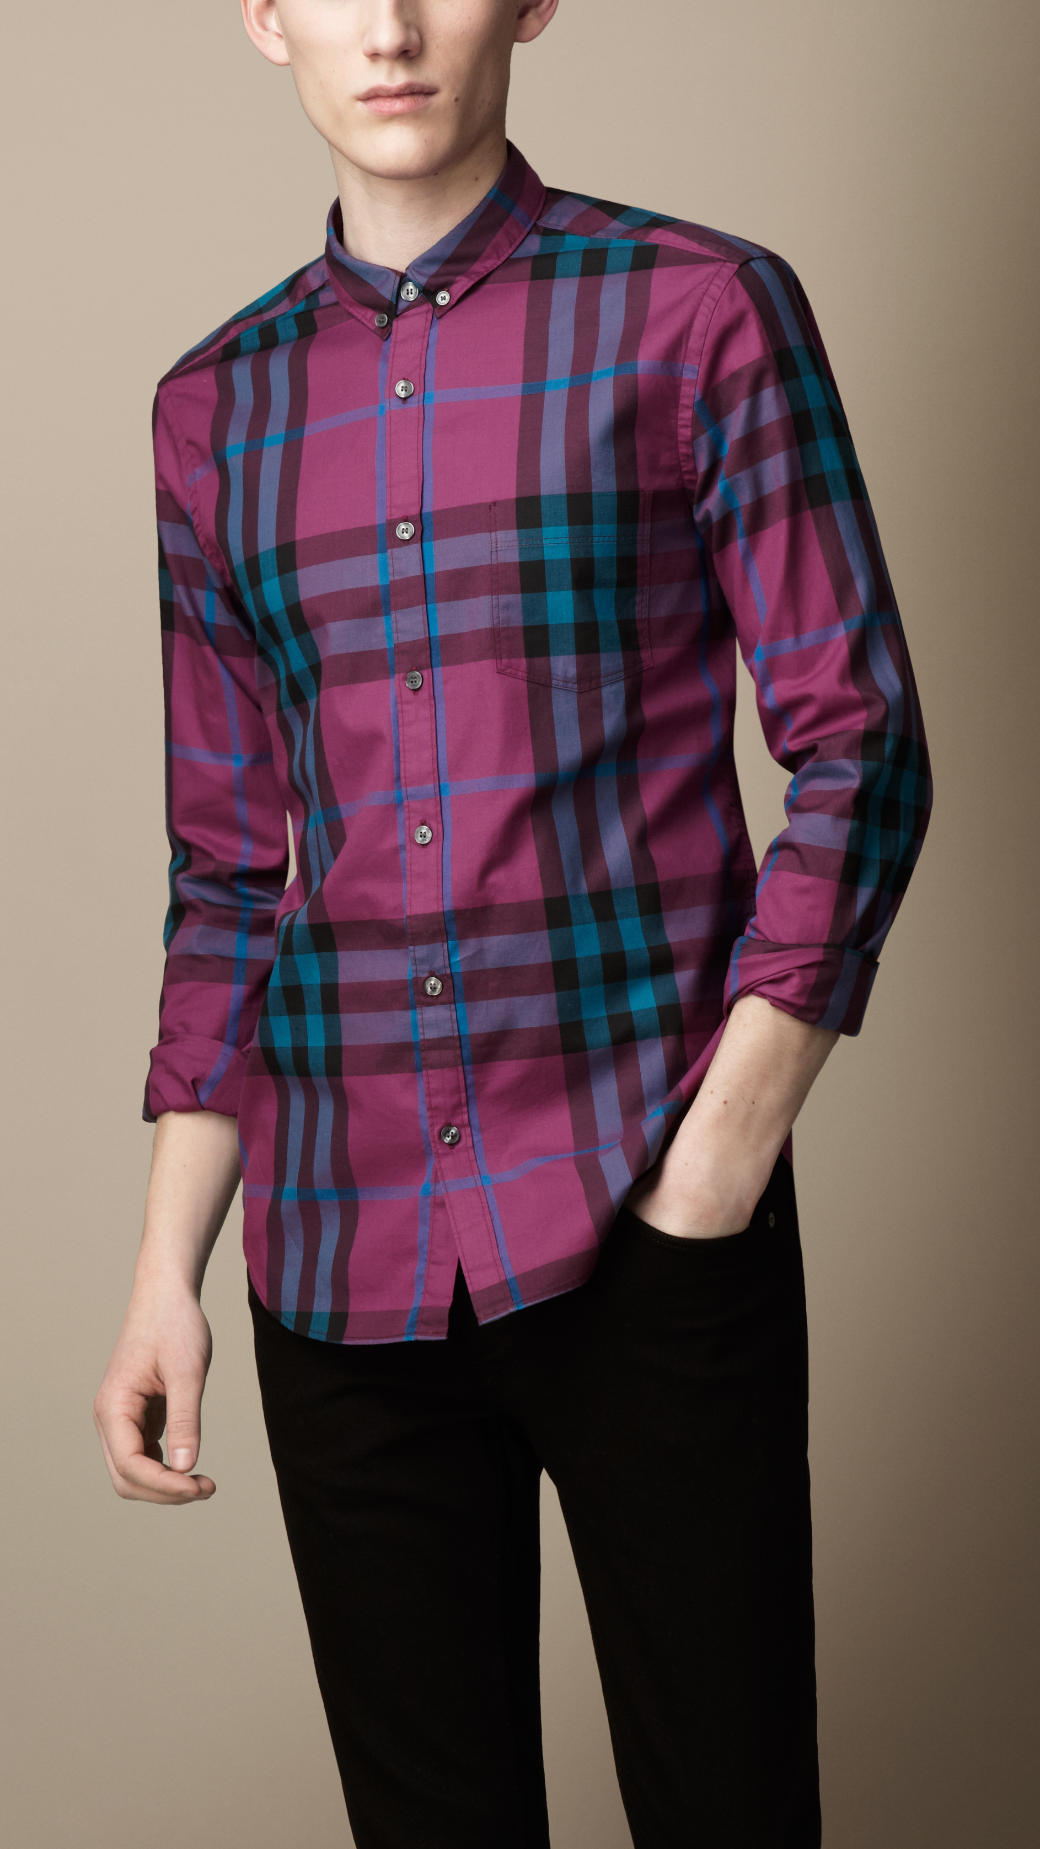 Lyst - Burberry Exploded Check Cotton Shirt in Purple for Men